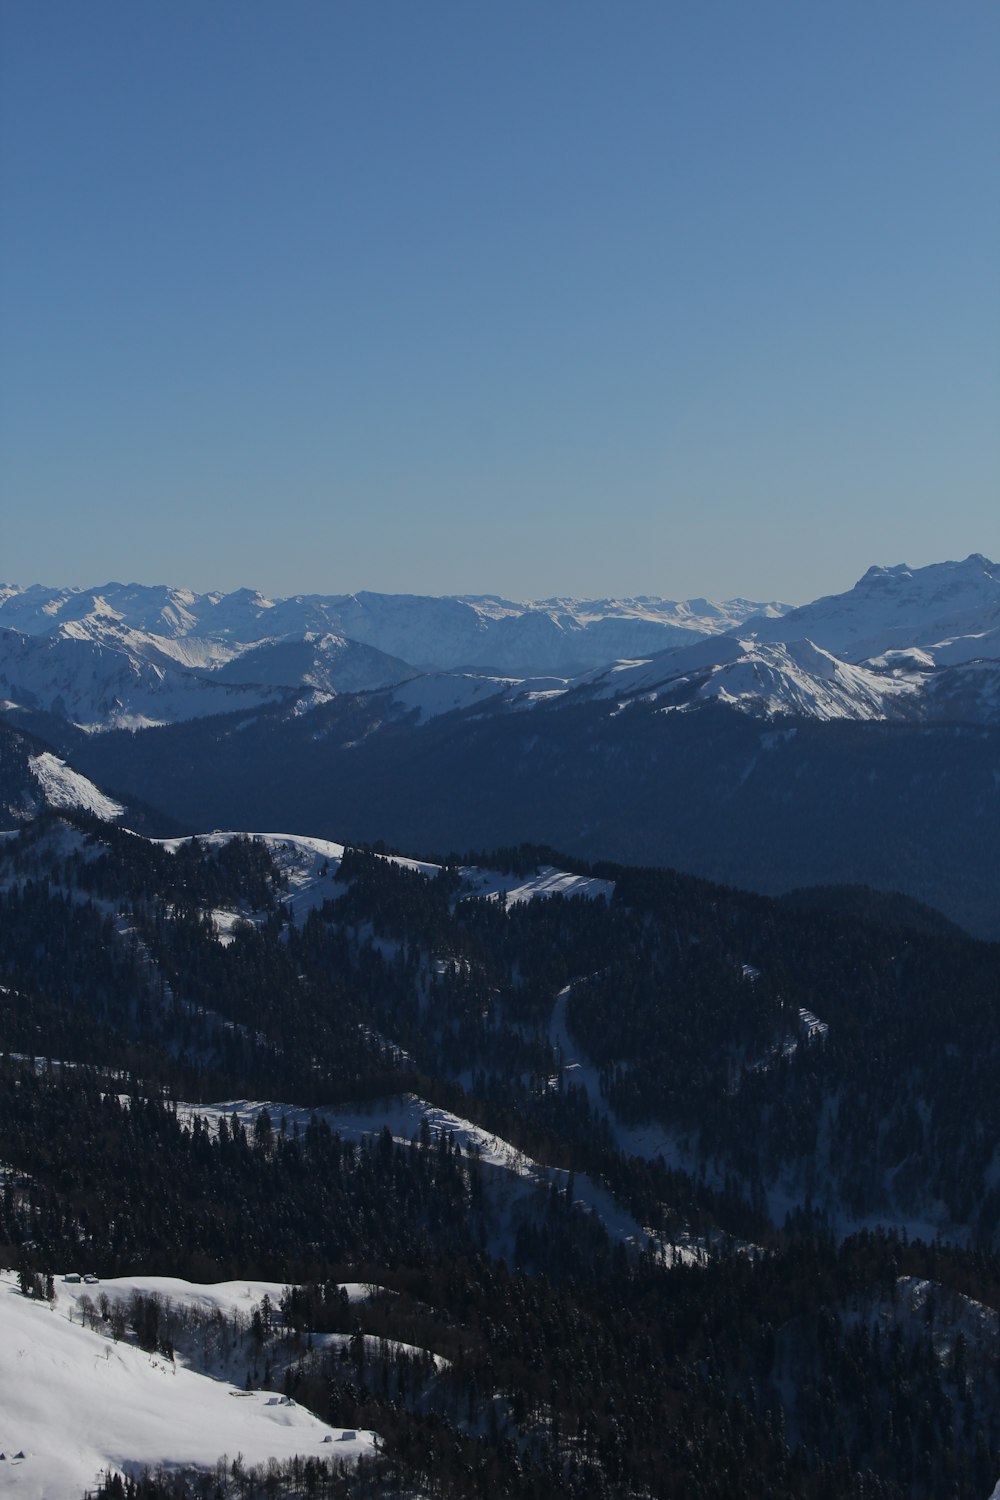 a view of a snowy mountain range from a high point of view